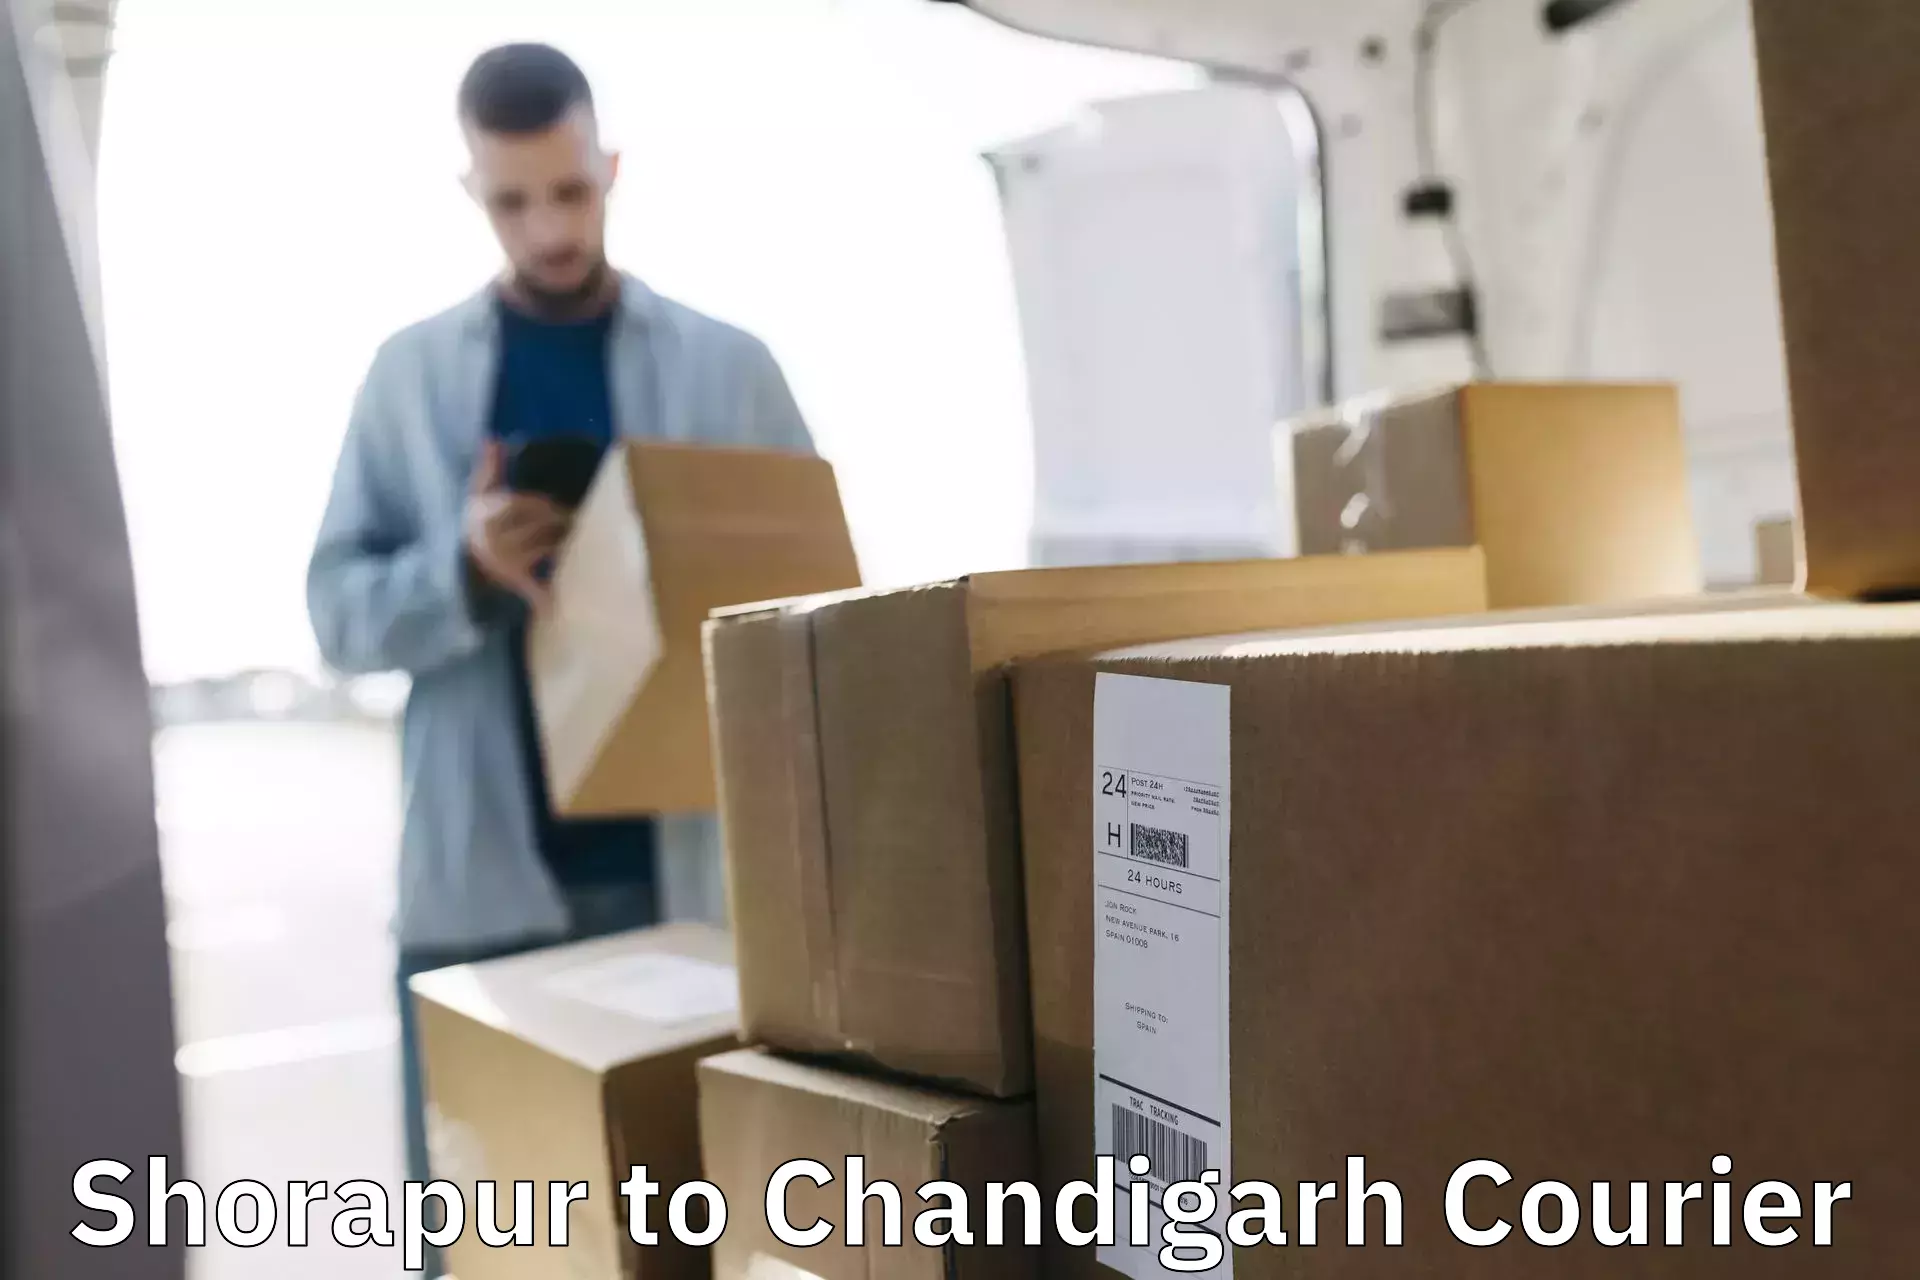 Parcel service for businesses Shorapur to Chandigarh